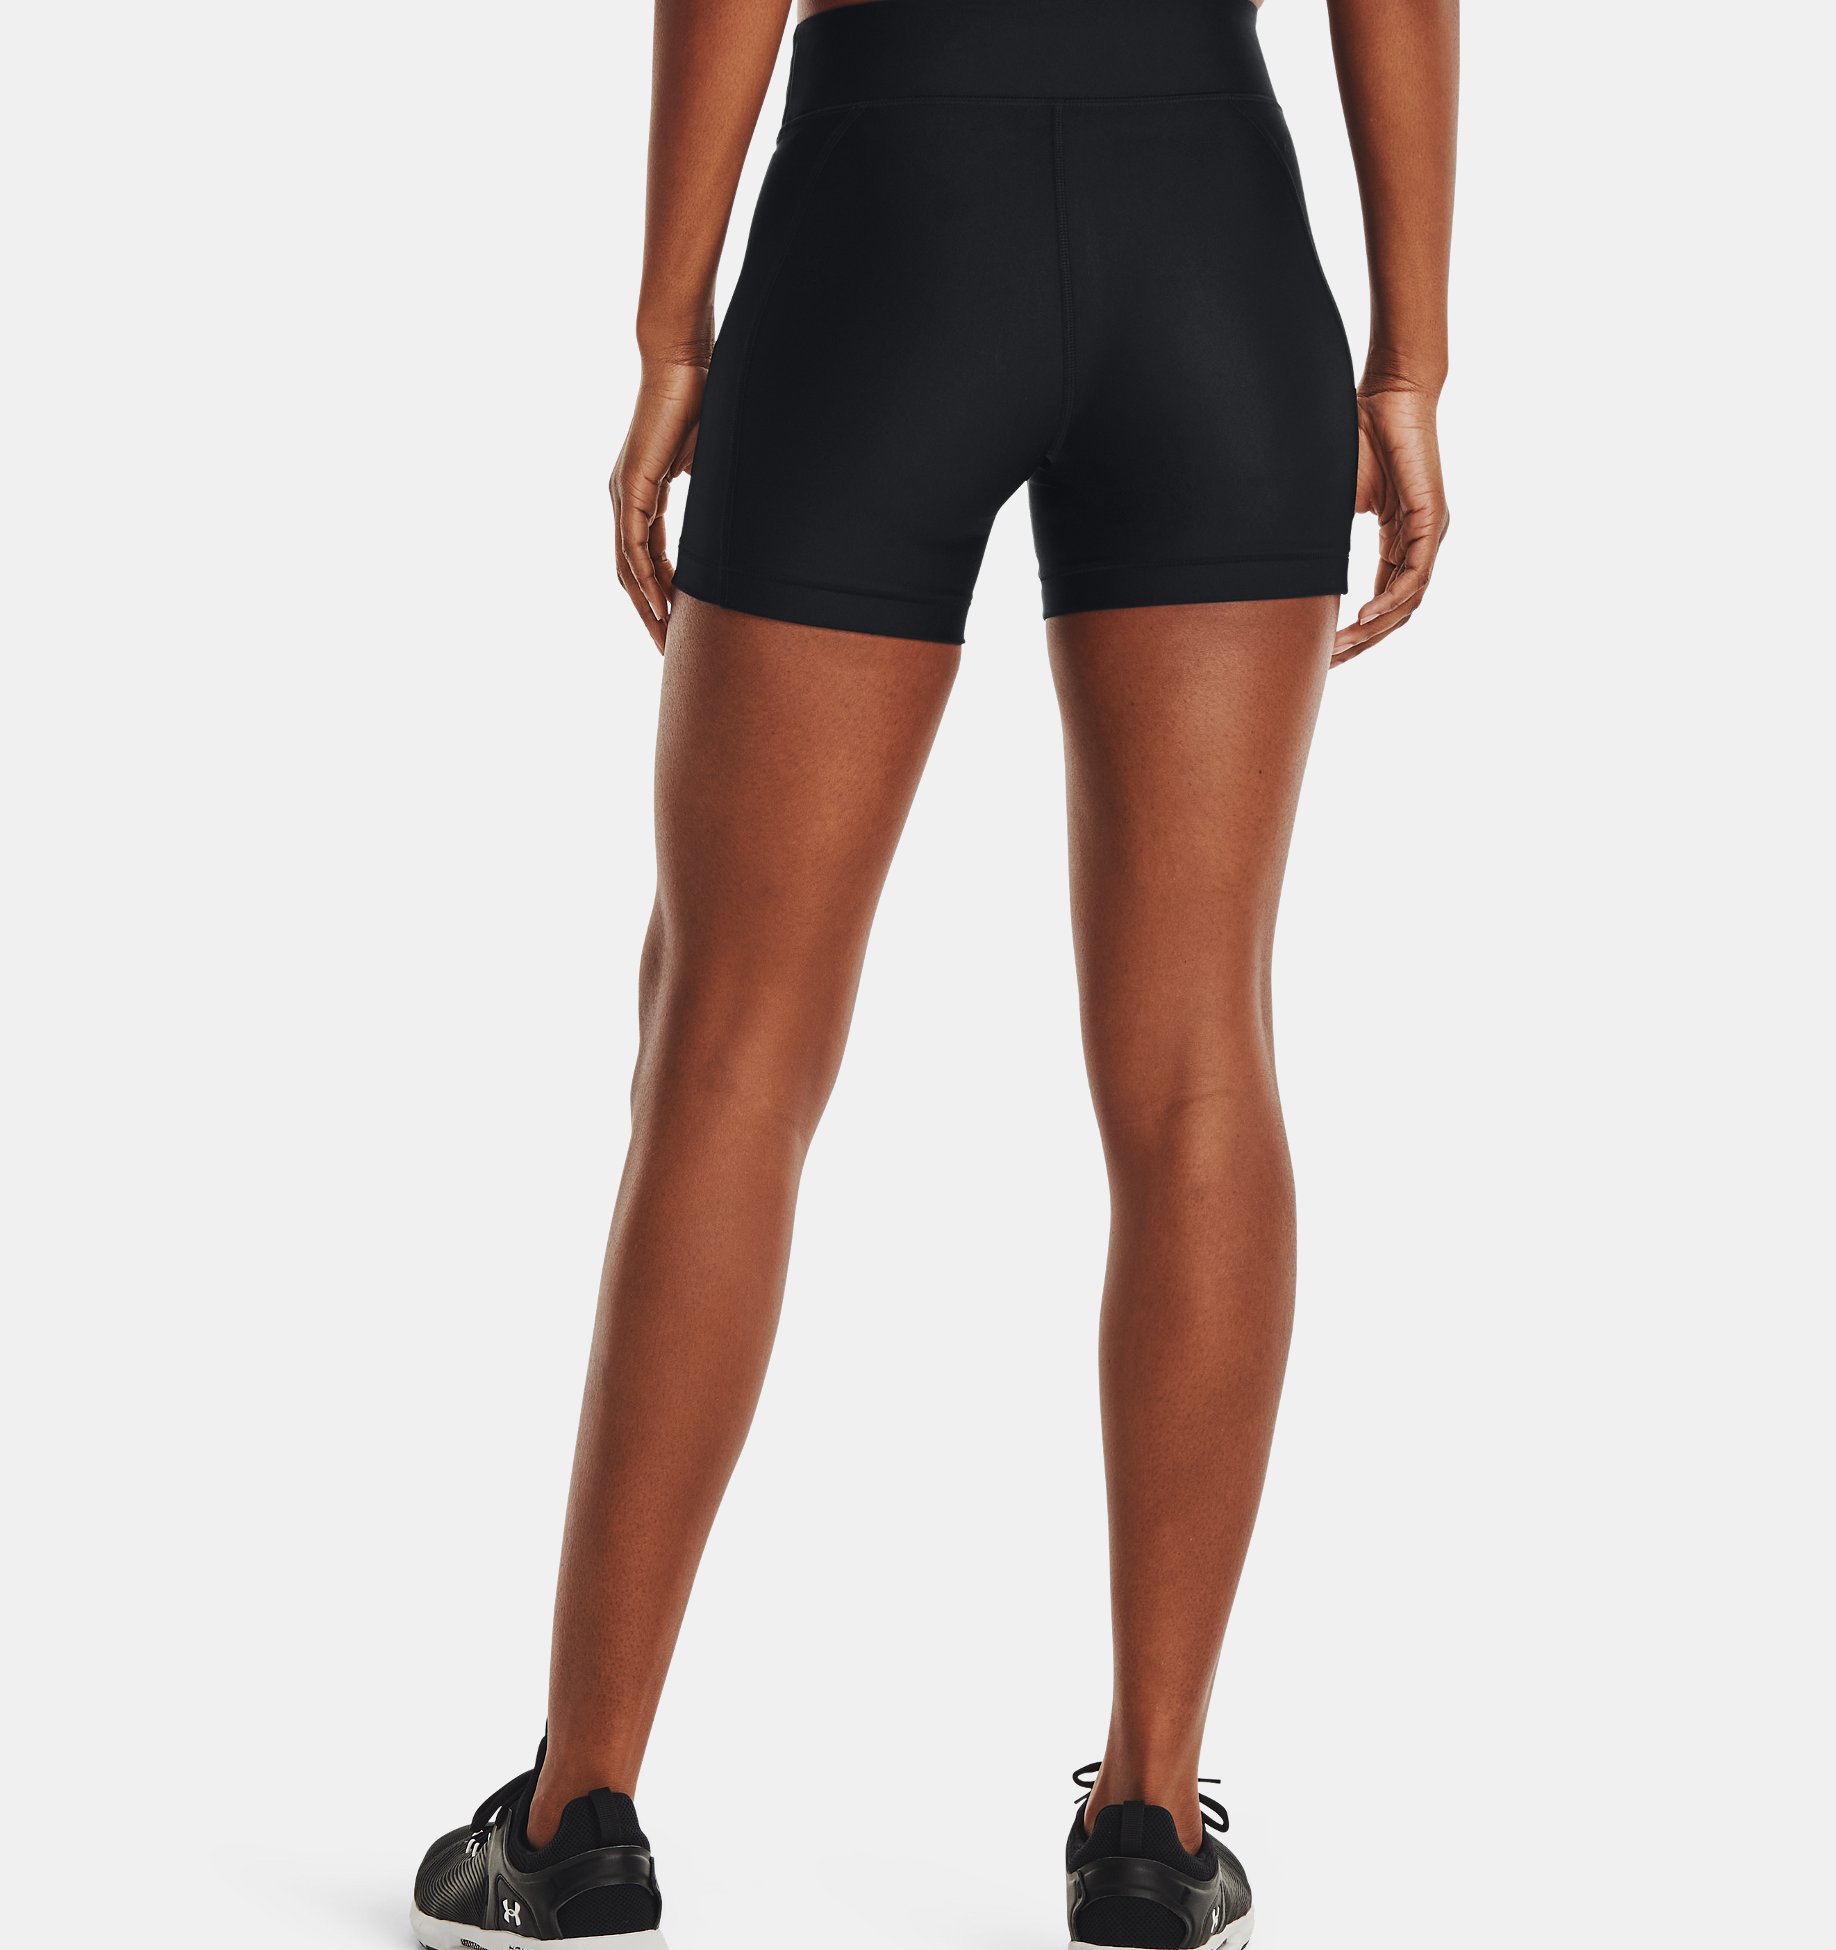 UK 16-18 Details about   Under Armour HeatGear Armour Middy Womens Fitness Training Short 